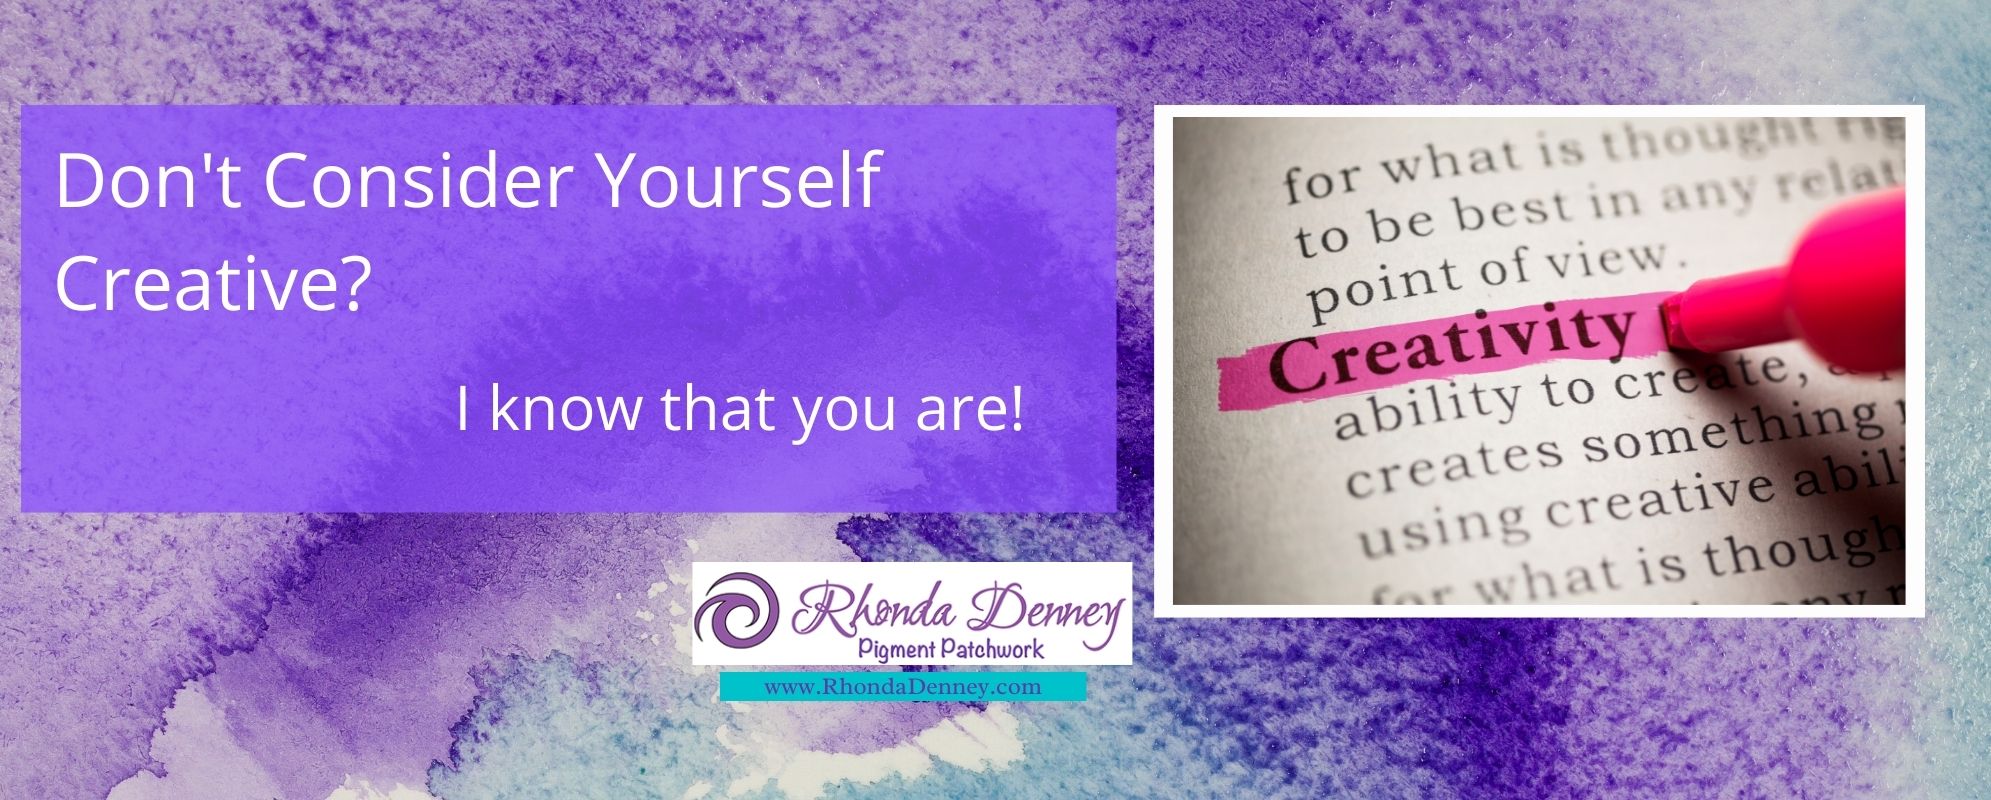 Rhonda Denney - Don't Consider Yourself Creative? I know that you are!